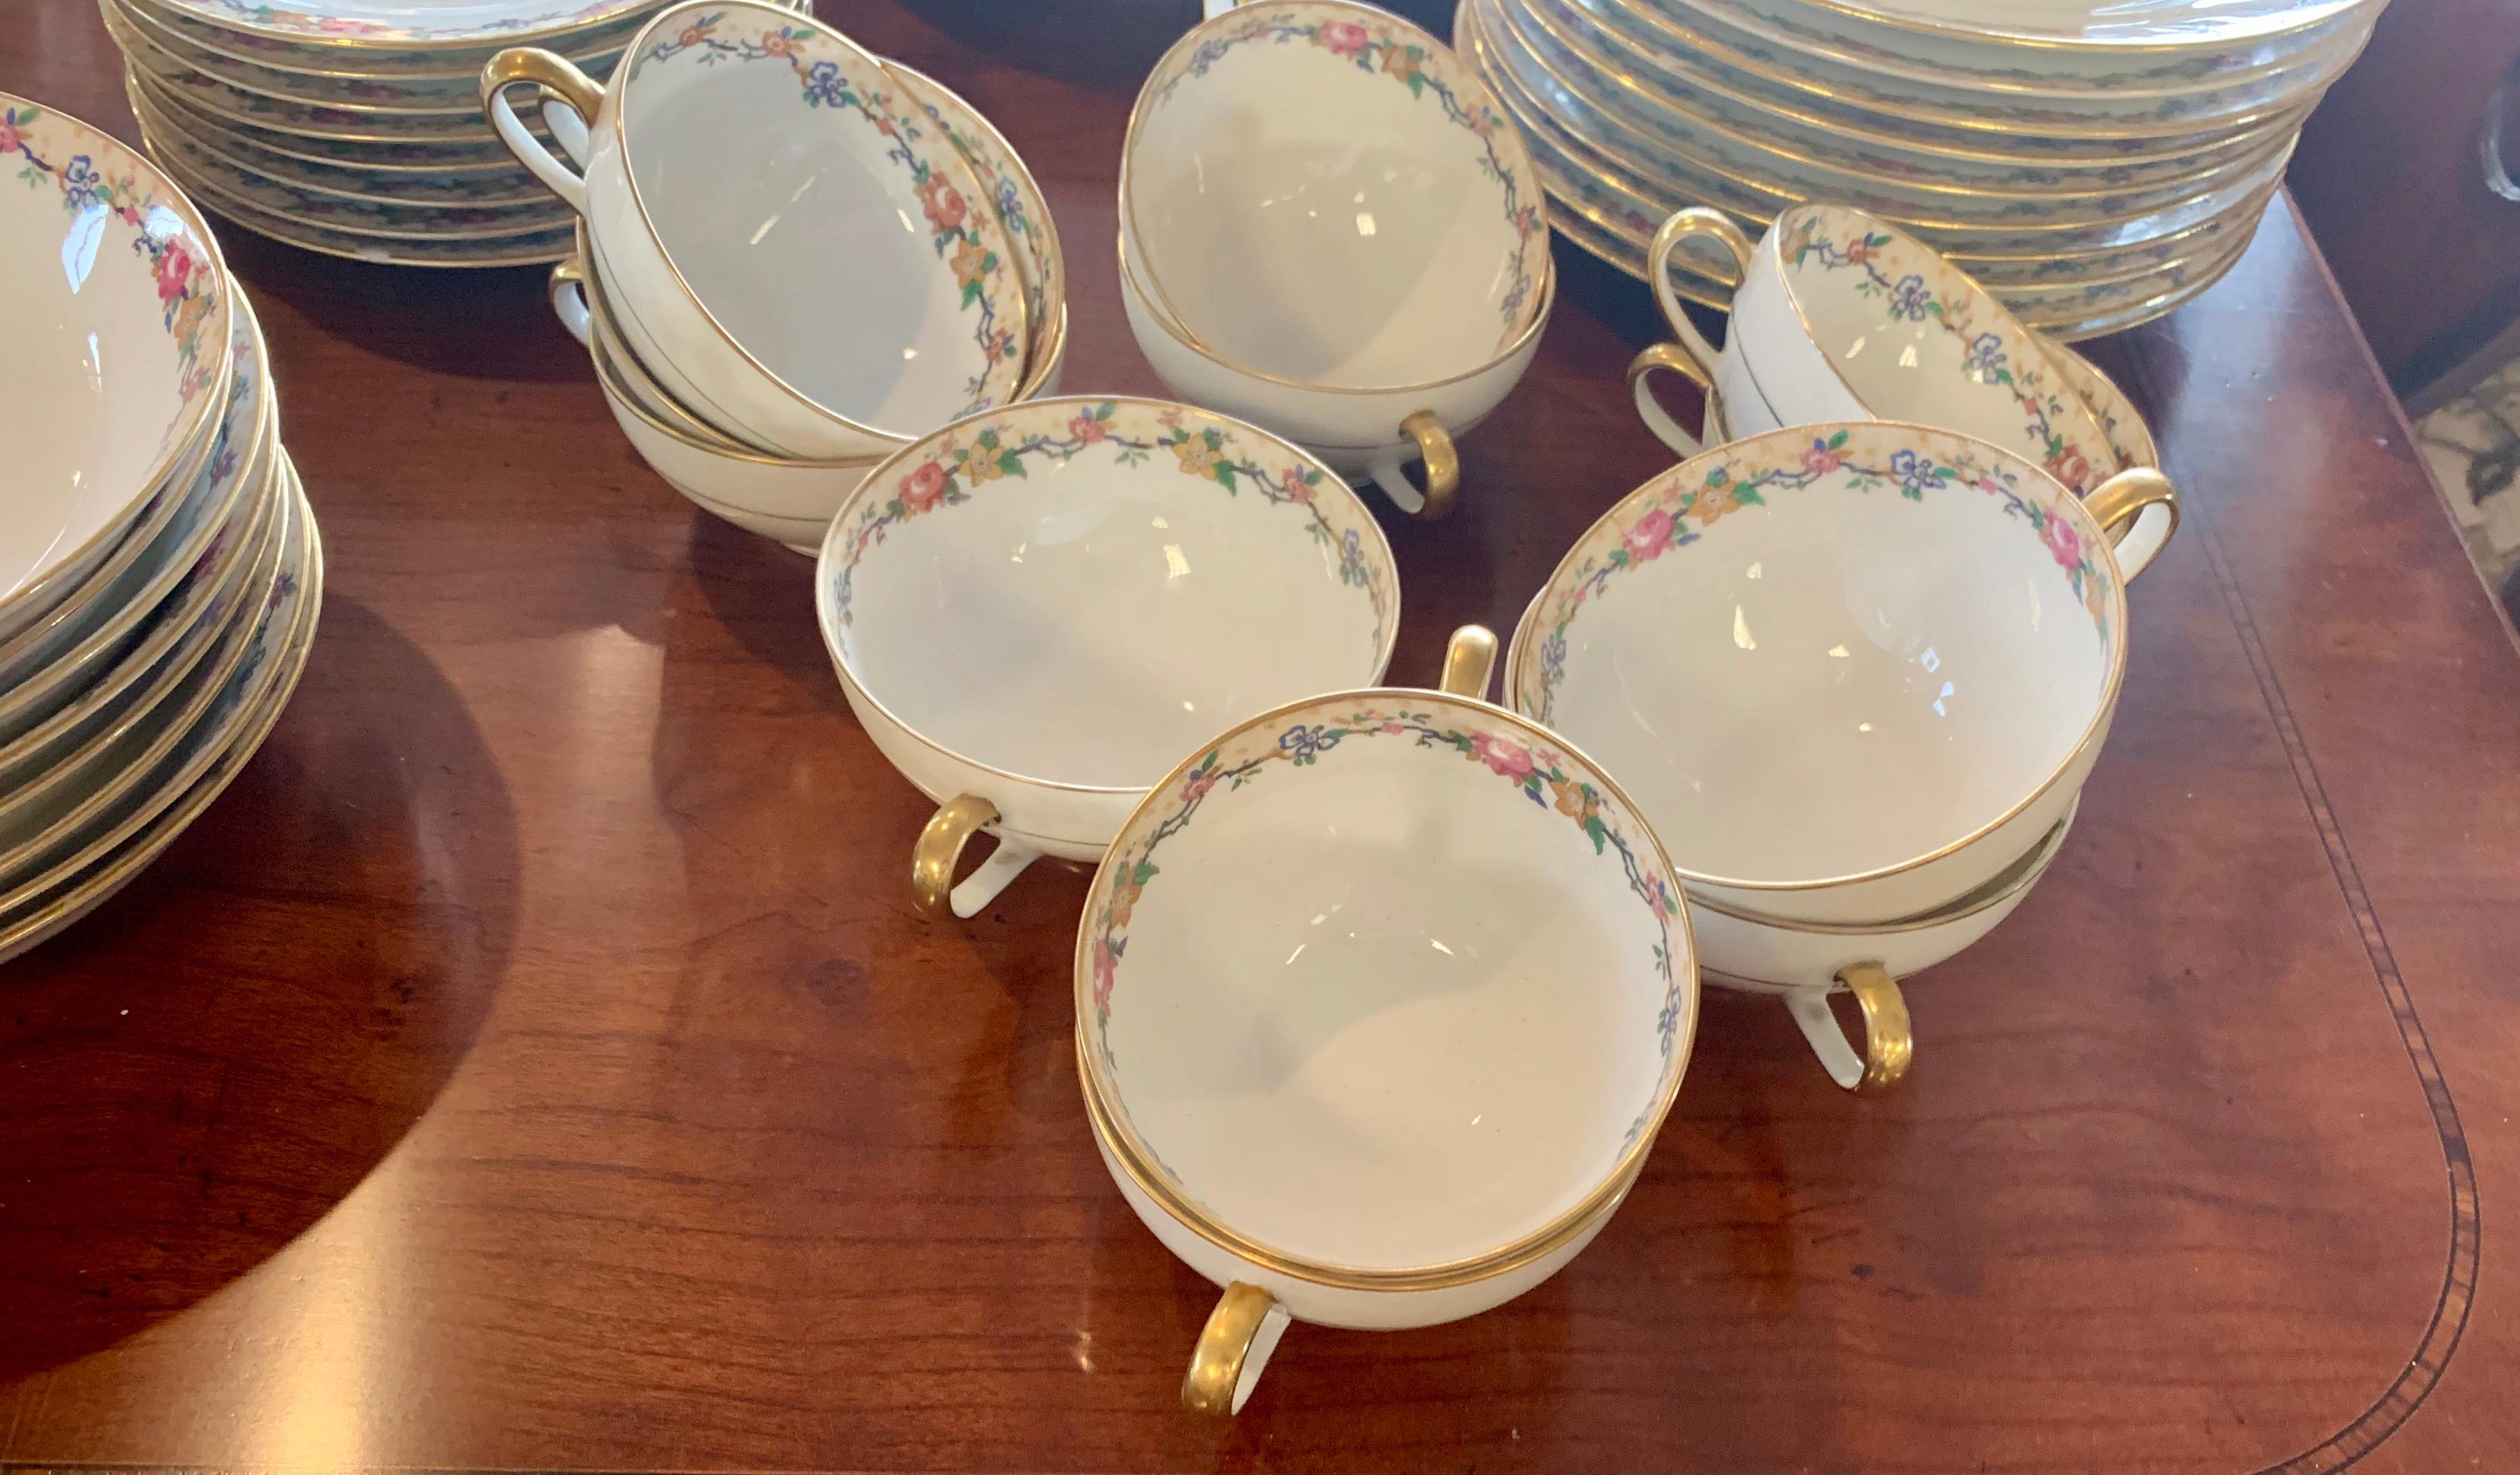 Early 20th Century Limoges Porcelain Dinner Service Fine China Service 1916 Extensive 105 Pieces